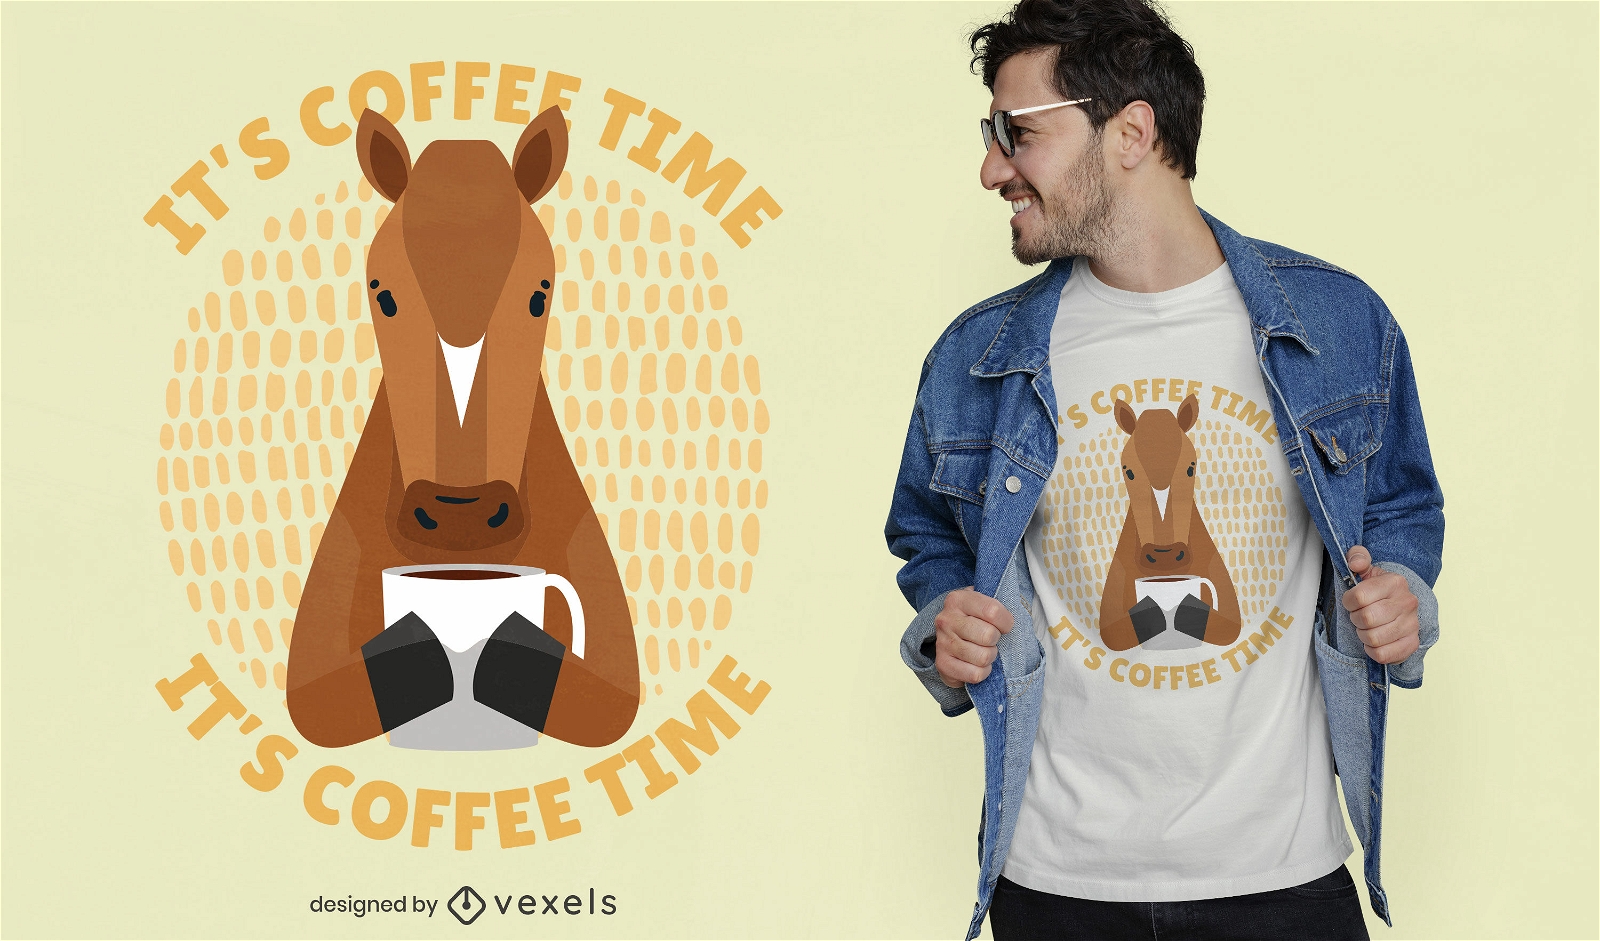 It's coffee time horse t-shirt design